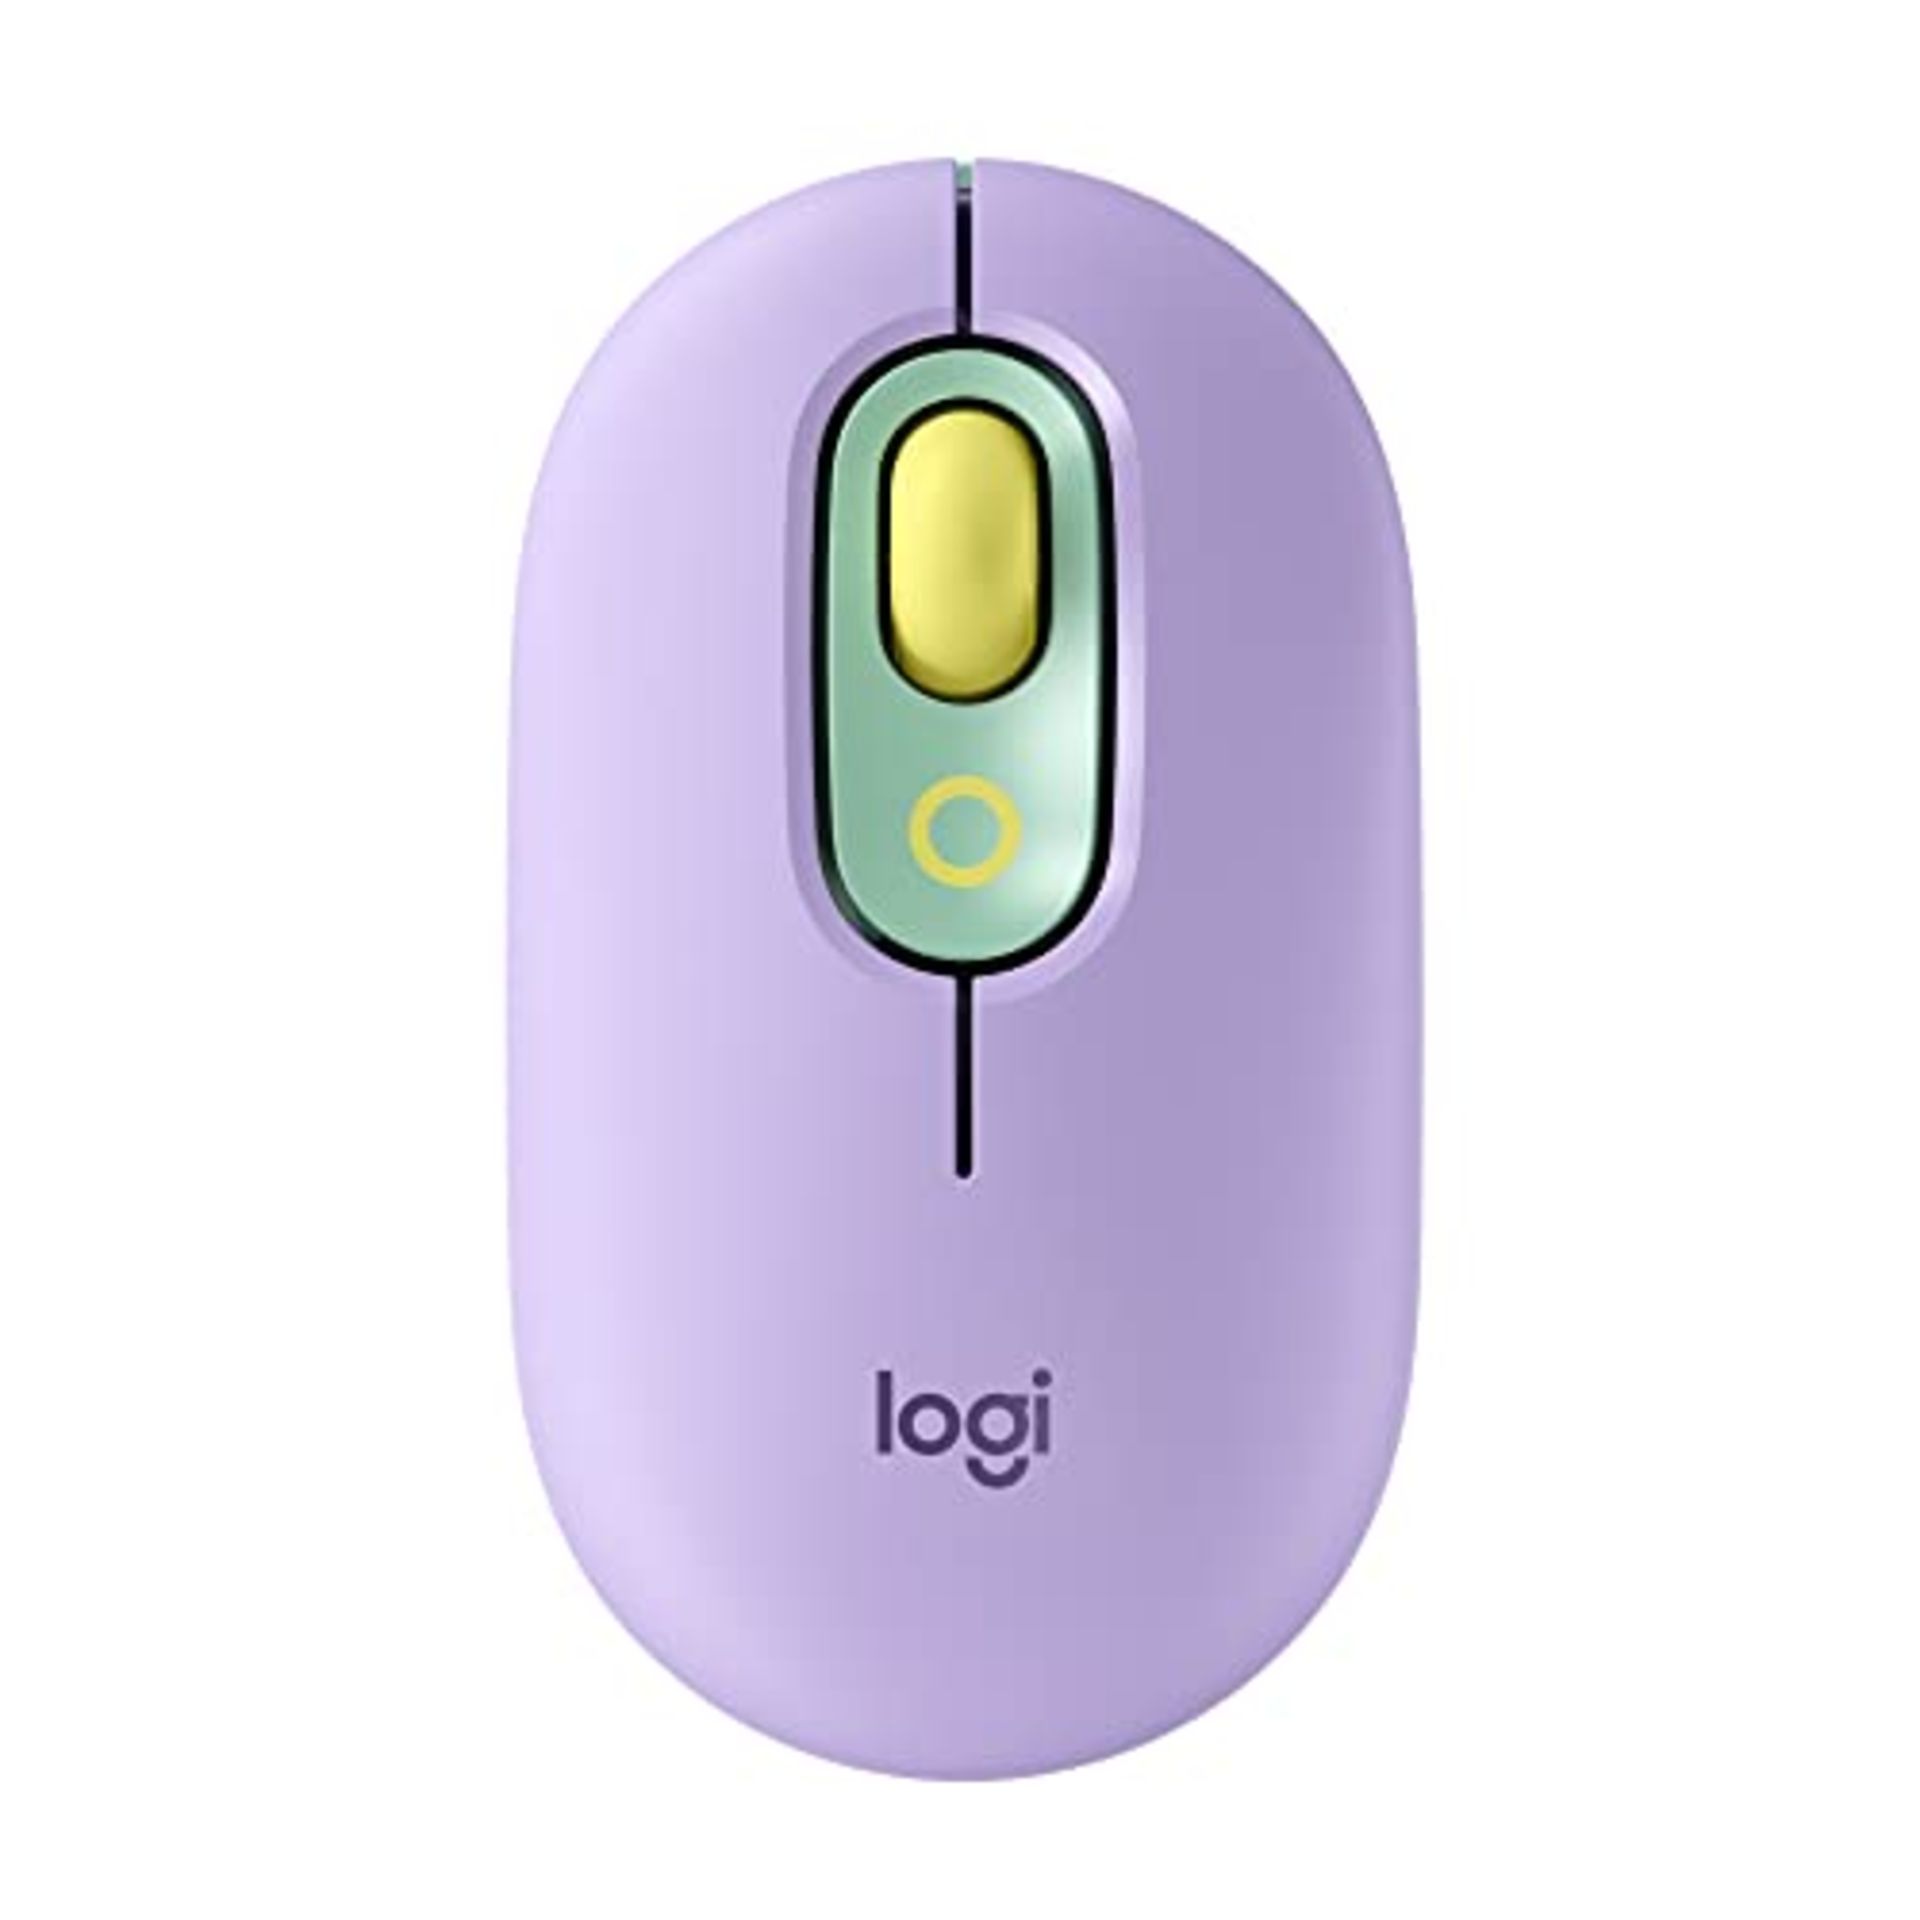 Logitech POP Mouse, Wireless Mouse with customizable emojis, SilentTouch Technology, p